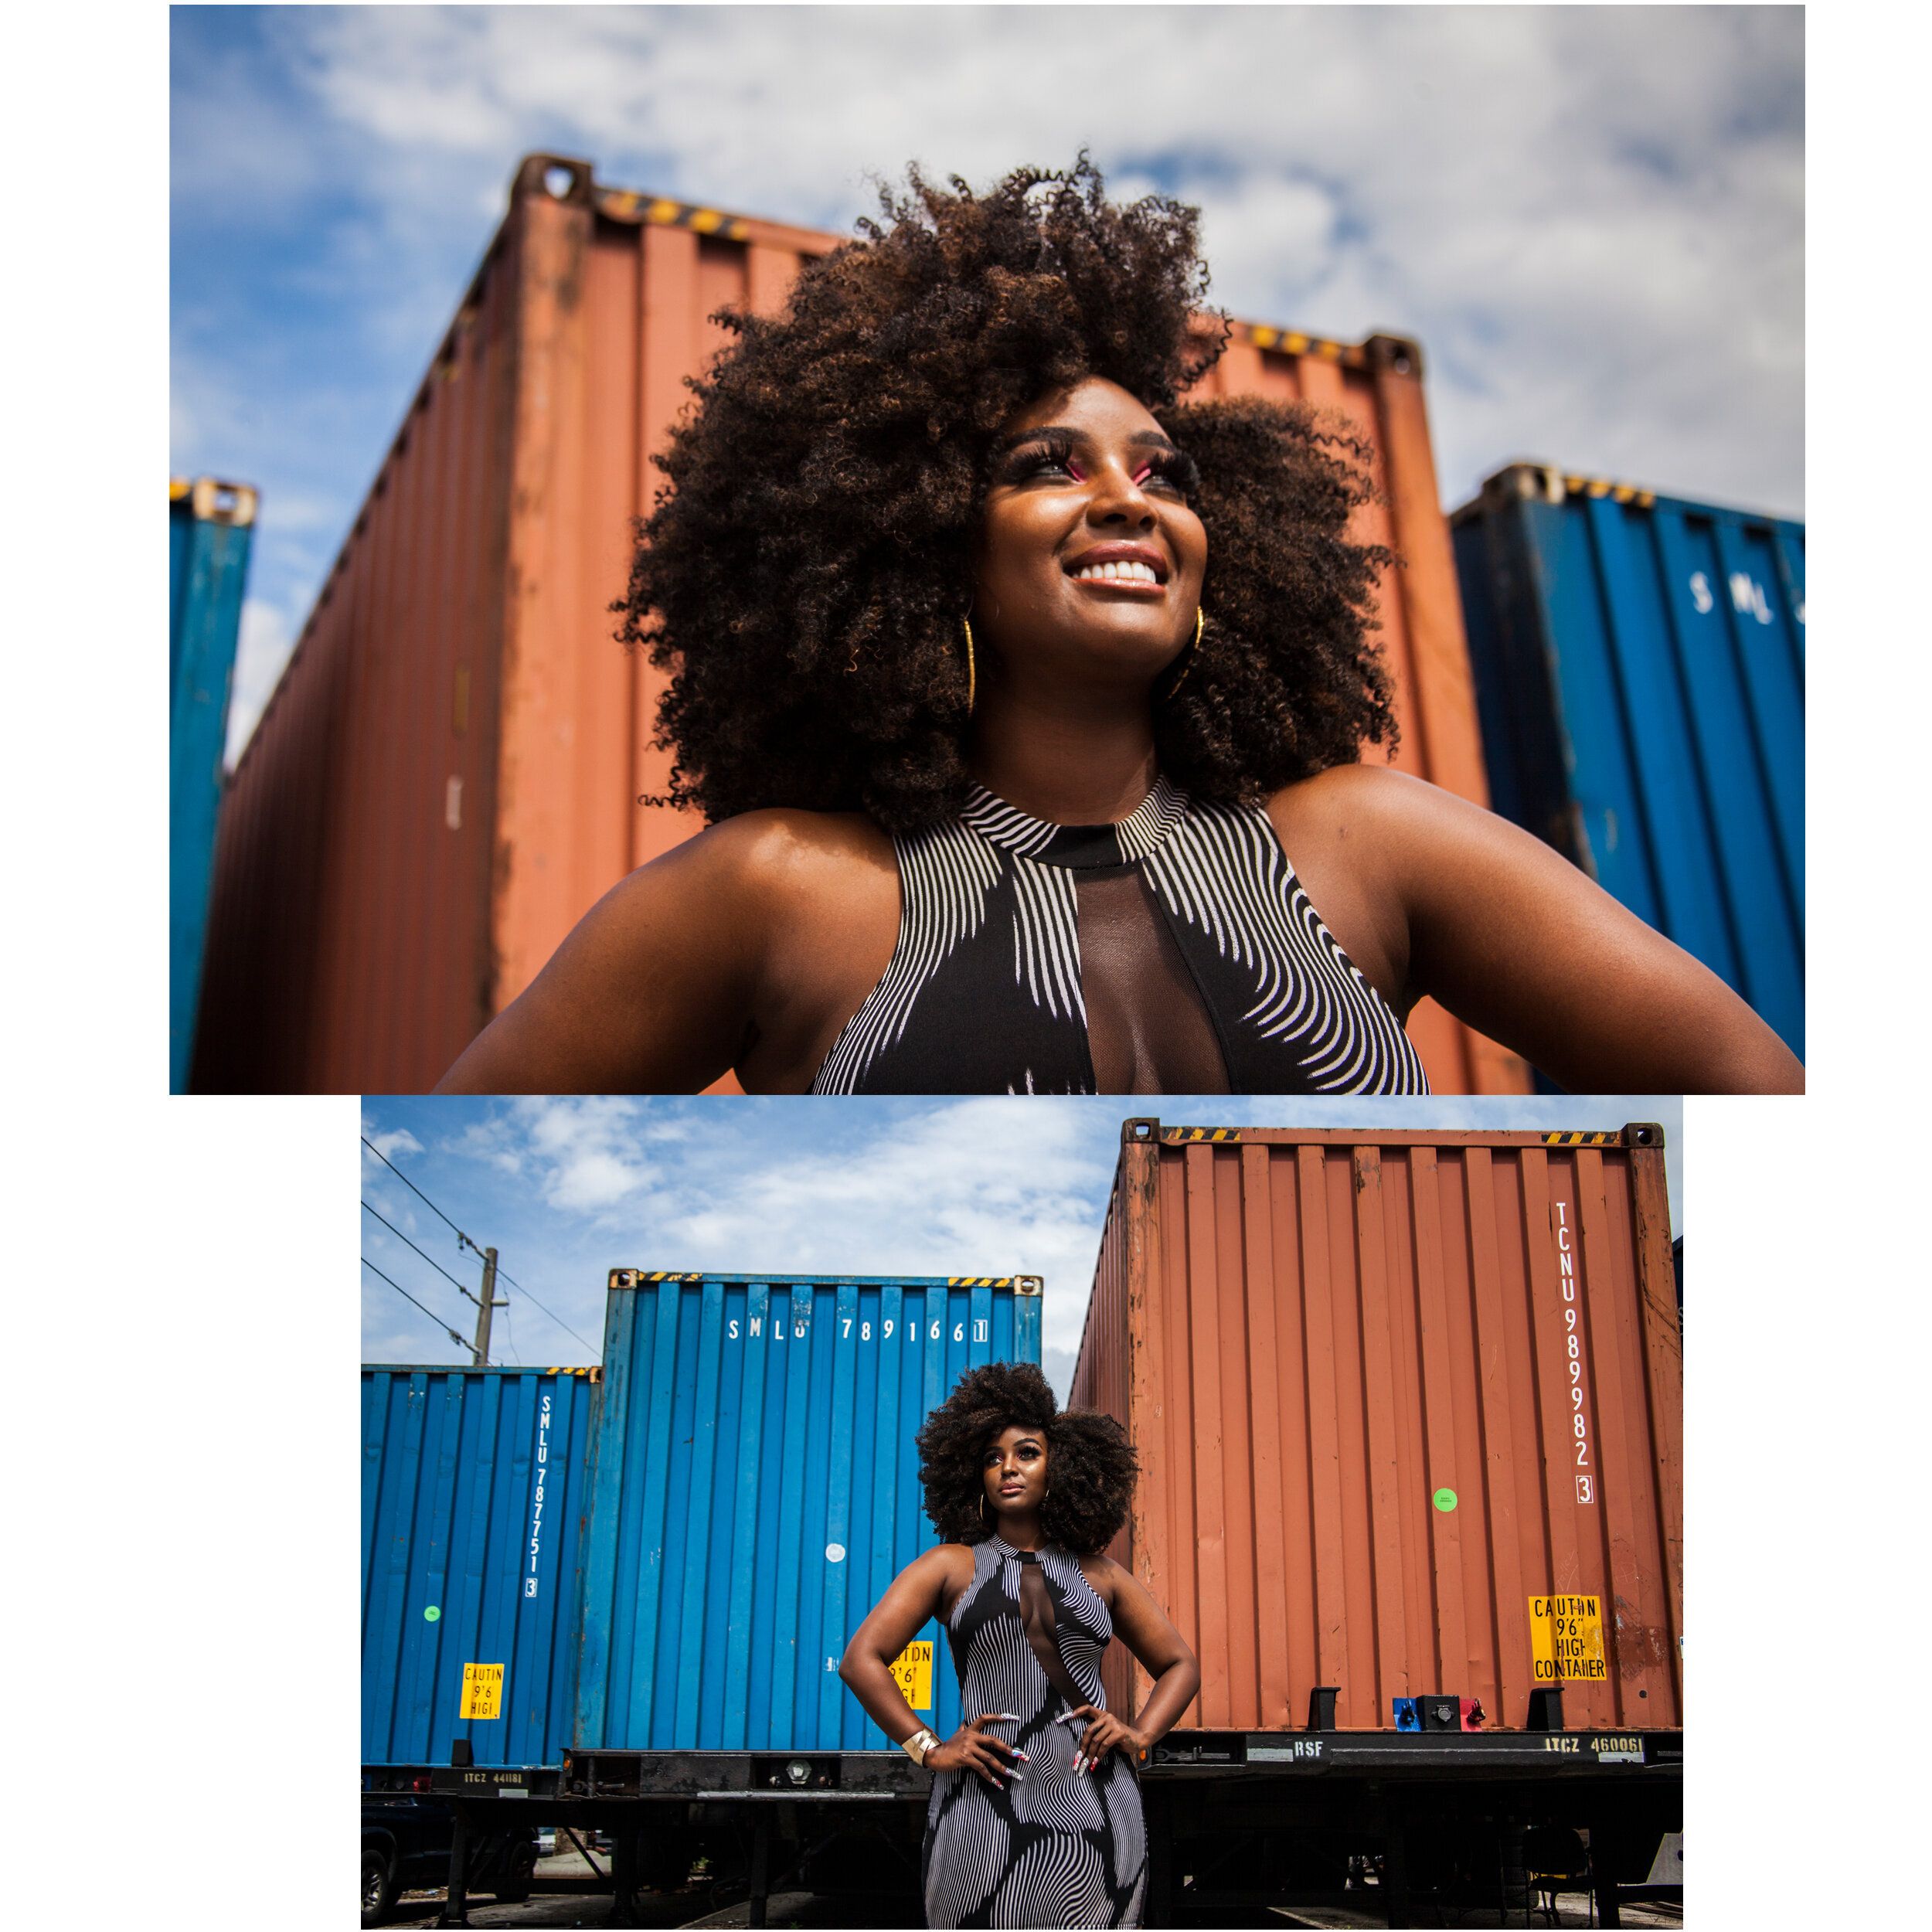 Amara La Negra, a Dominican-American hip-hop artist stands and poses in Miami, Florida on Aug. 29, 2019.&nbsp;